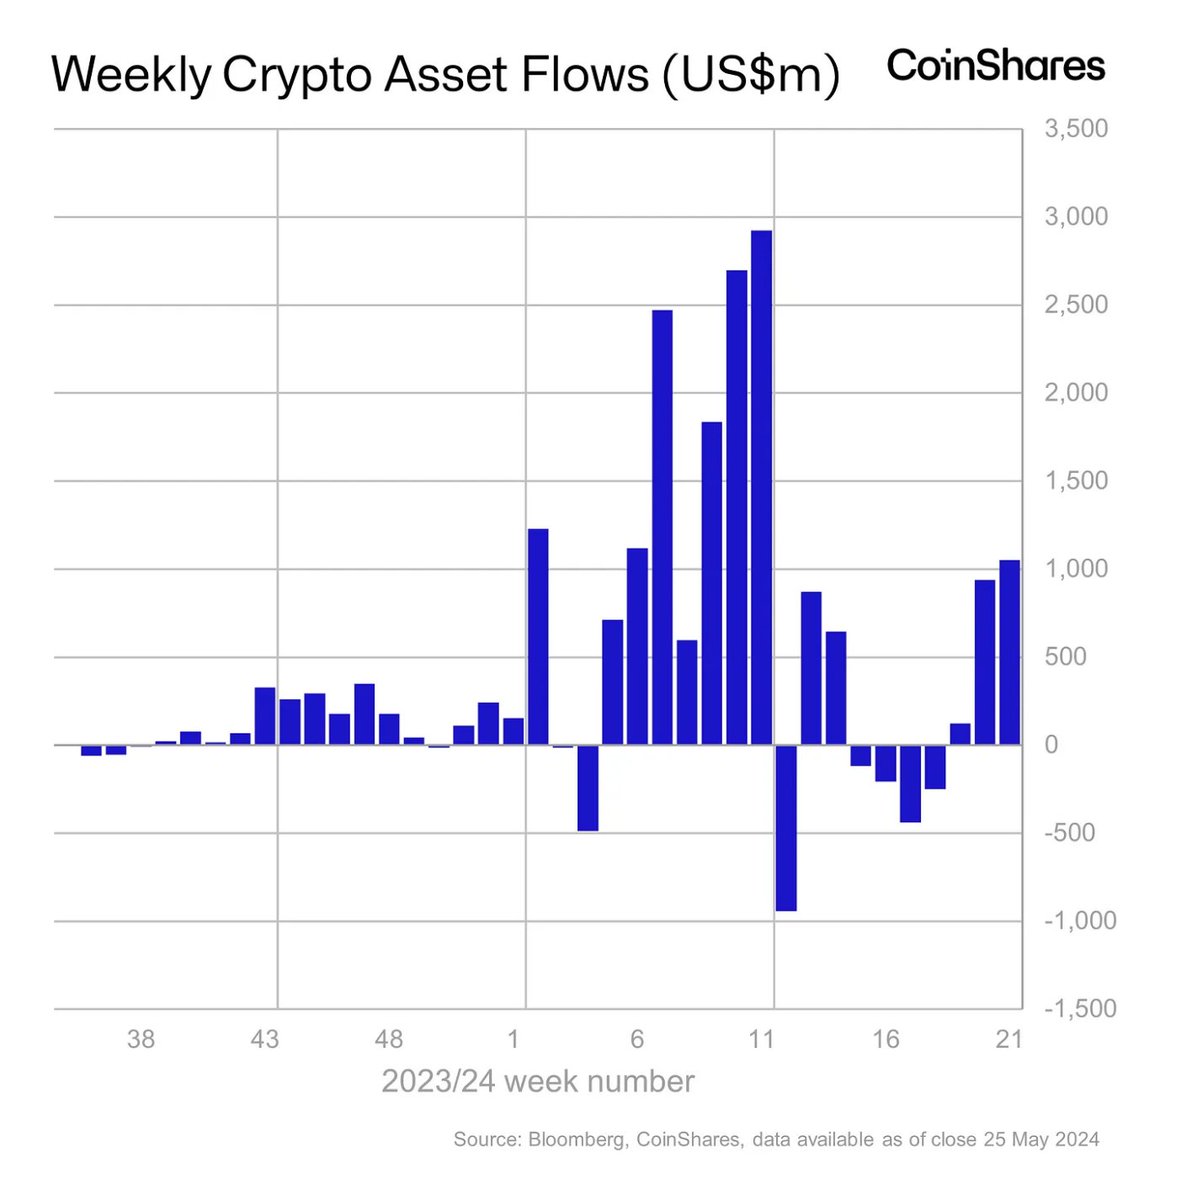 [COINSHARES] Digital asset investment products saw $1.05 billion in inflows for the third consecutive week, bringing year-to-date inflows to a record $14.9 billion. #Ethereum had $36 million in inflows this week, likely due to the $ETH ETF approval in the US